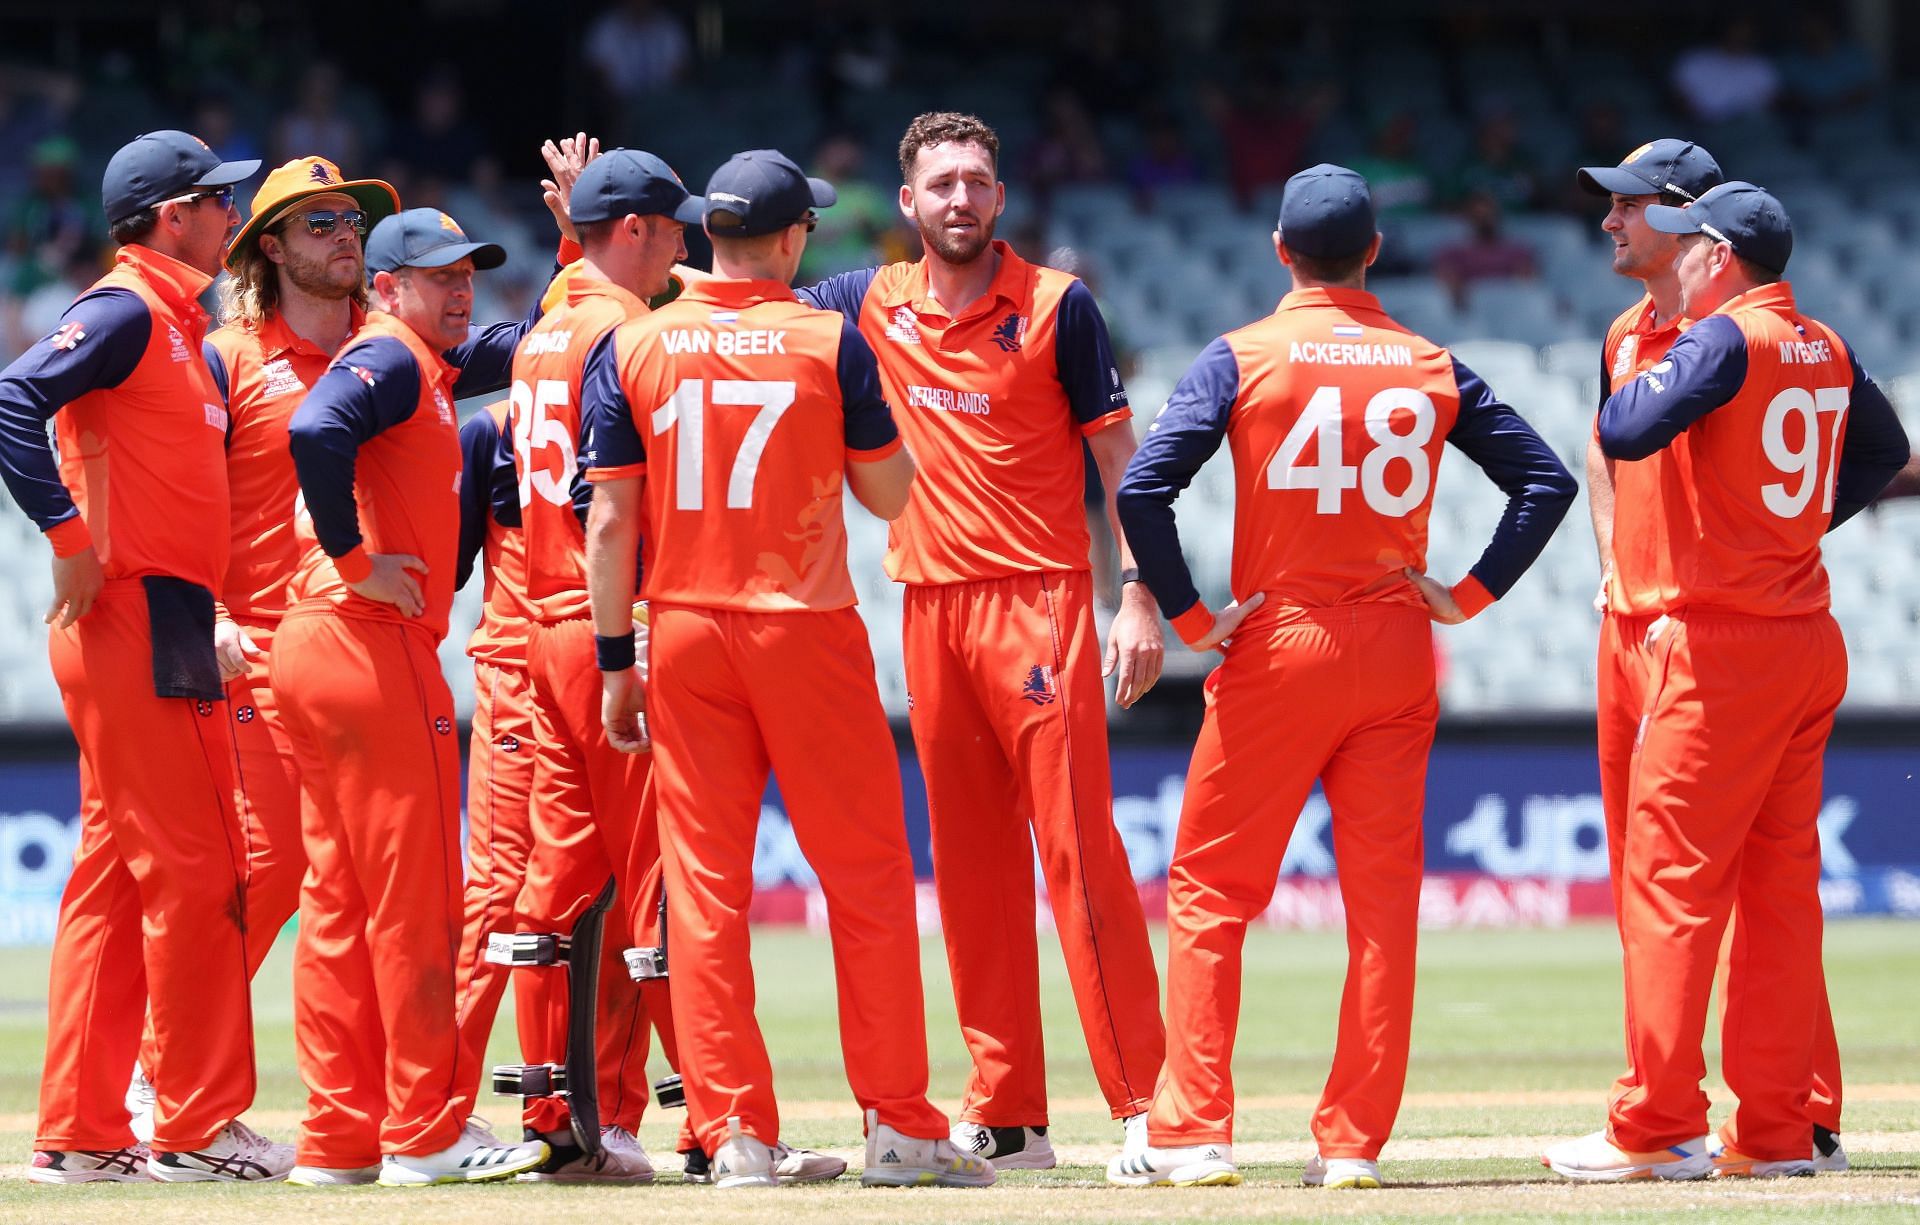 Netherlands will enter the 2023 ODI World Cup as minnows [Getty Images]